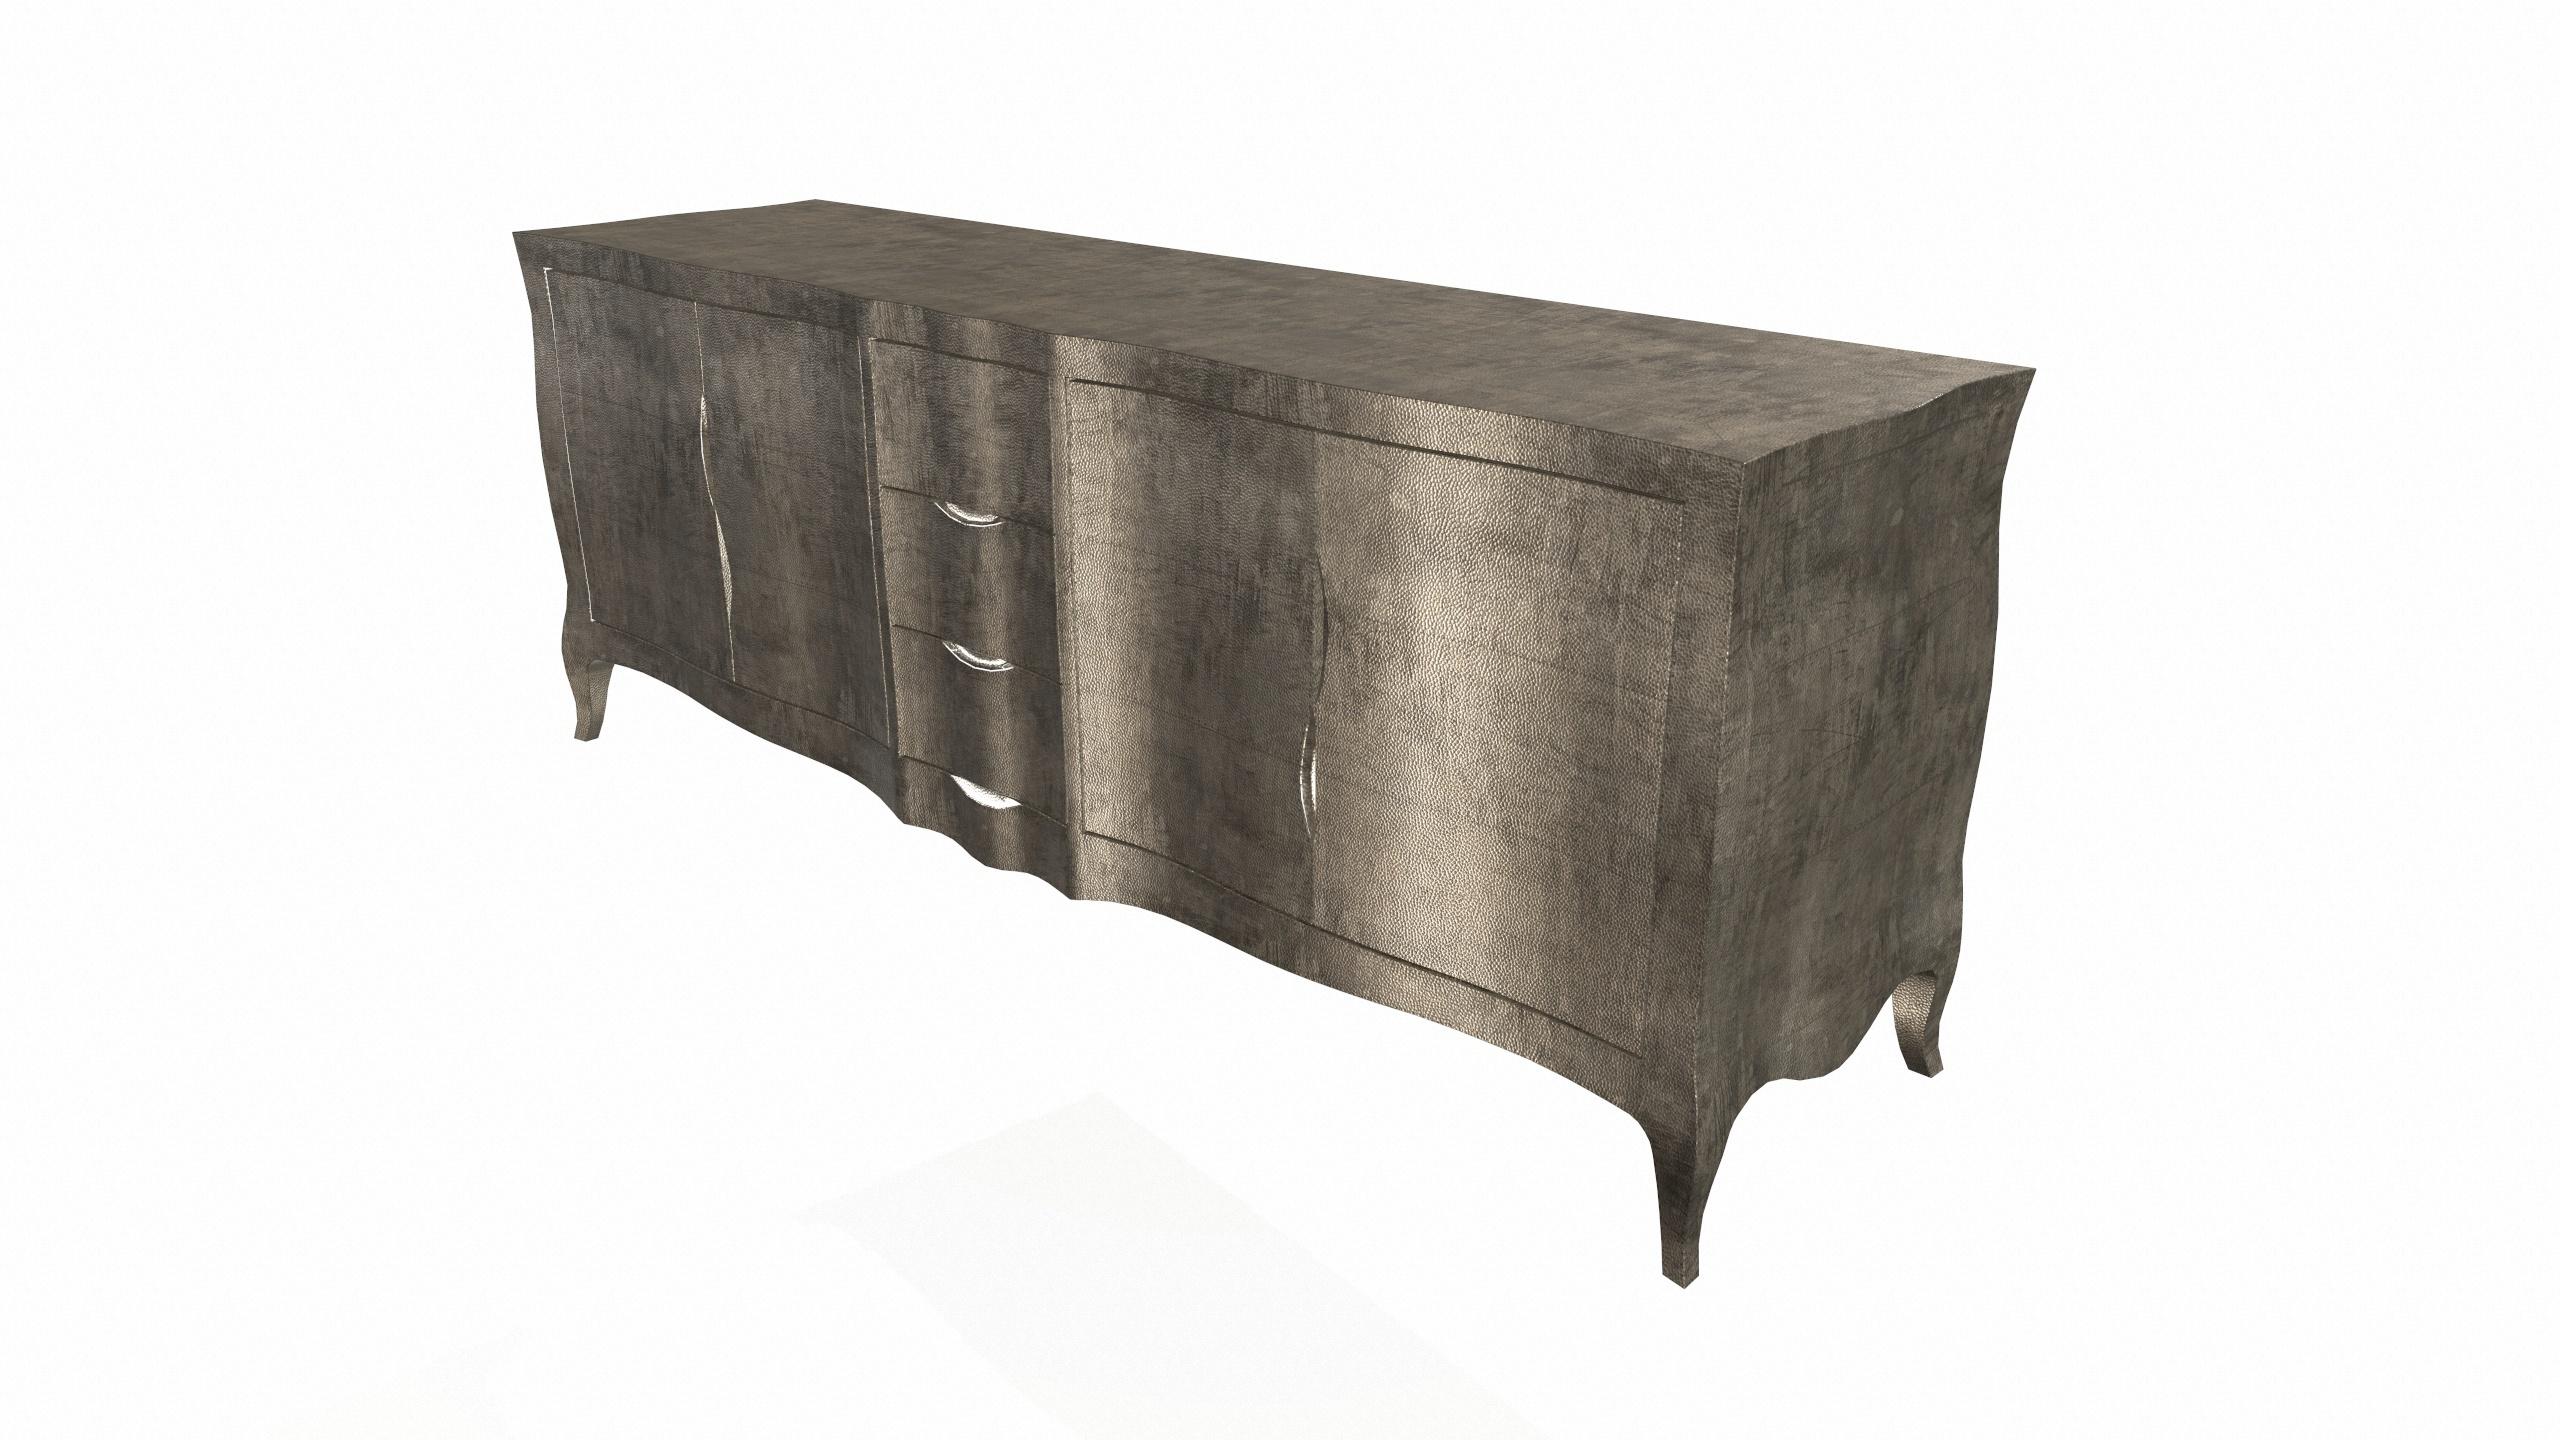 American Louise Credenza Art Deco Bookcases in Mid. Hammered Antique Bronze by P Mathieu For Sale